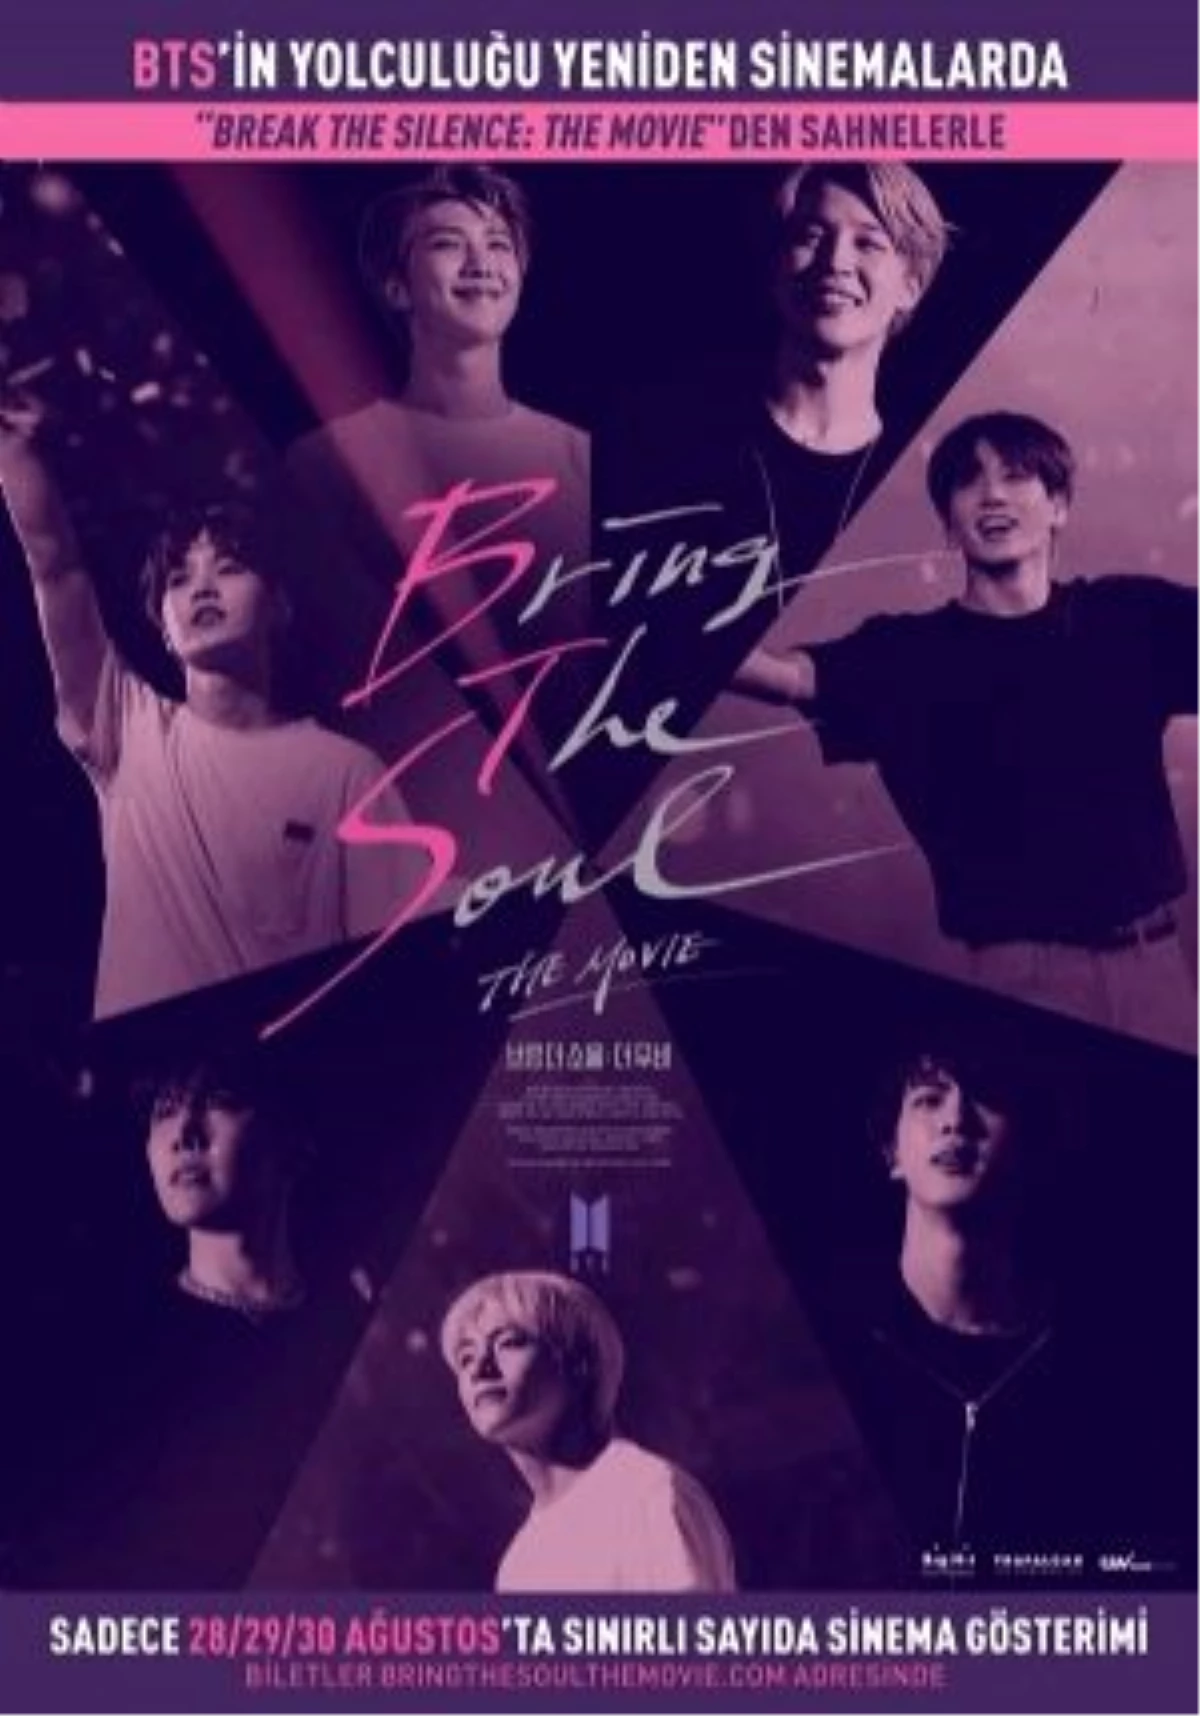 Bring The Soul: The Movie Filmi